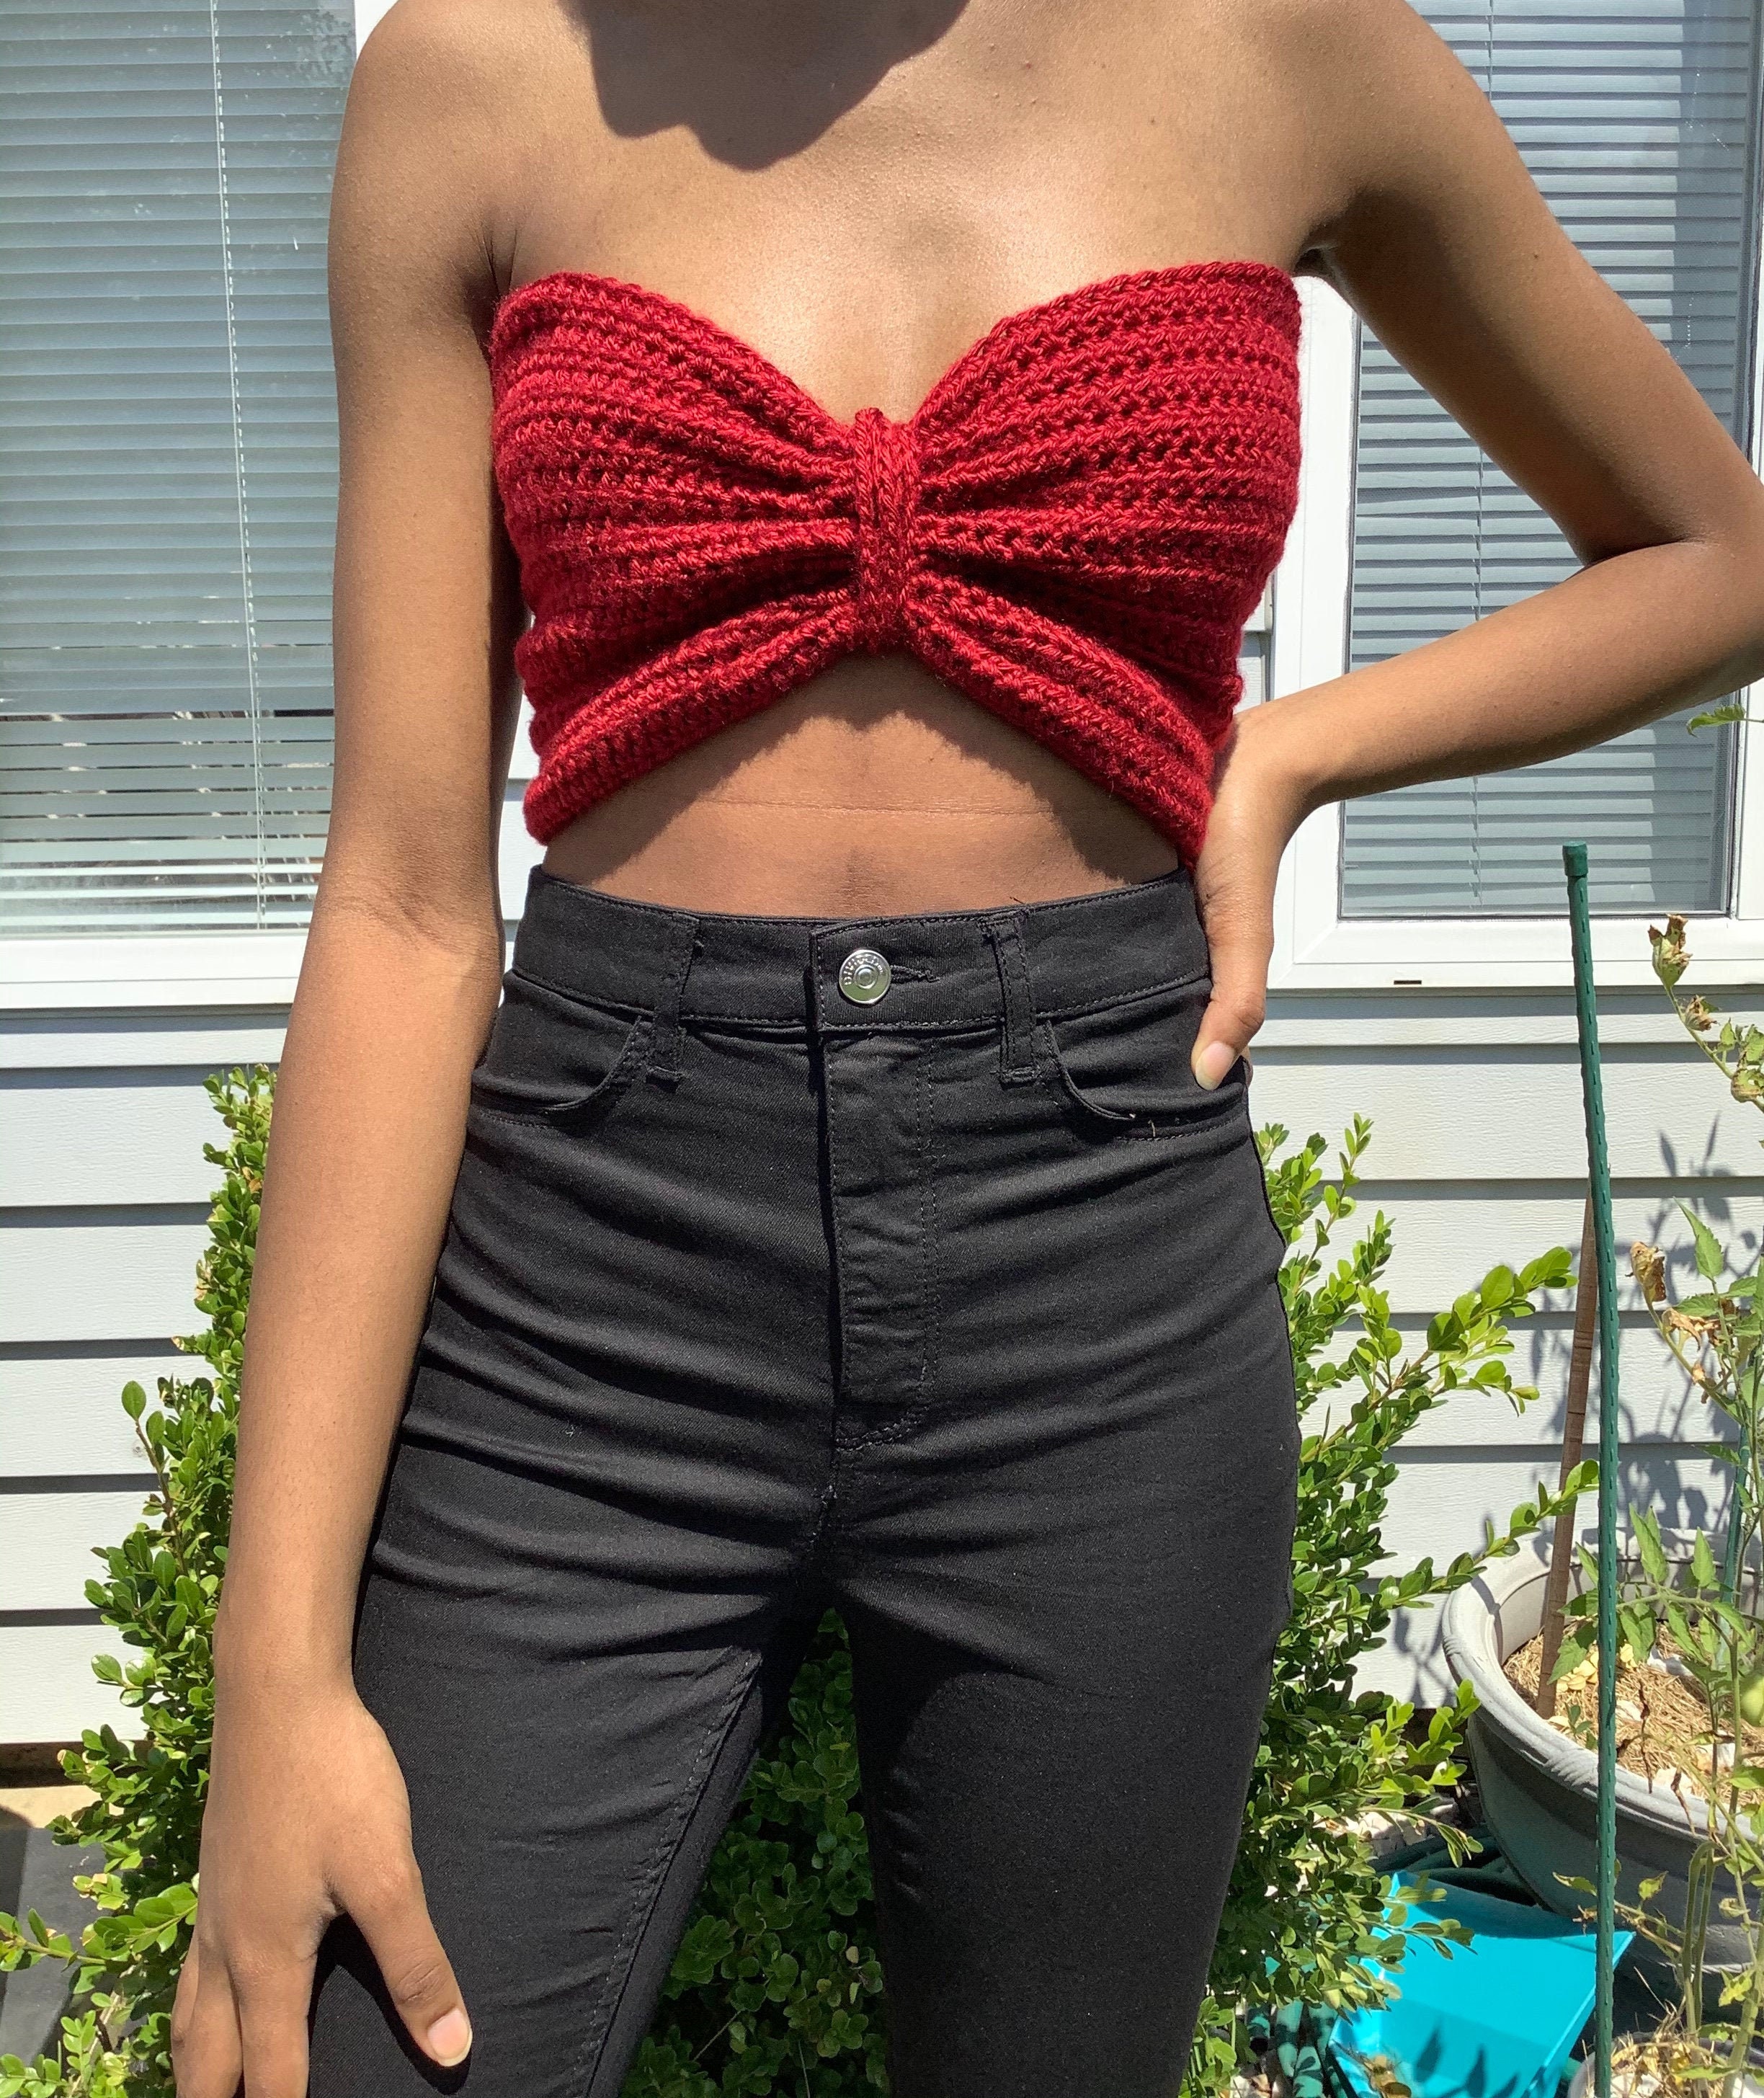 Handmade Crochet Ruched Crop Top Red Wine Strapless With Laced Back With  Bowed Design 